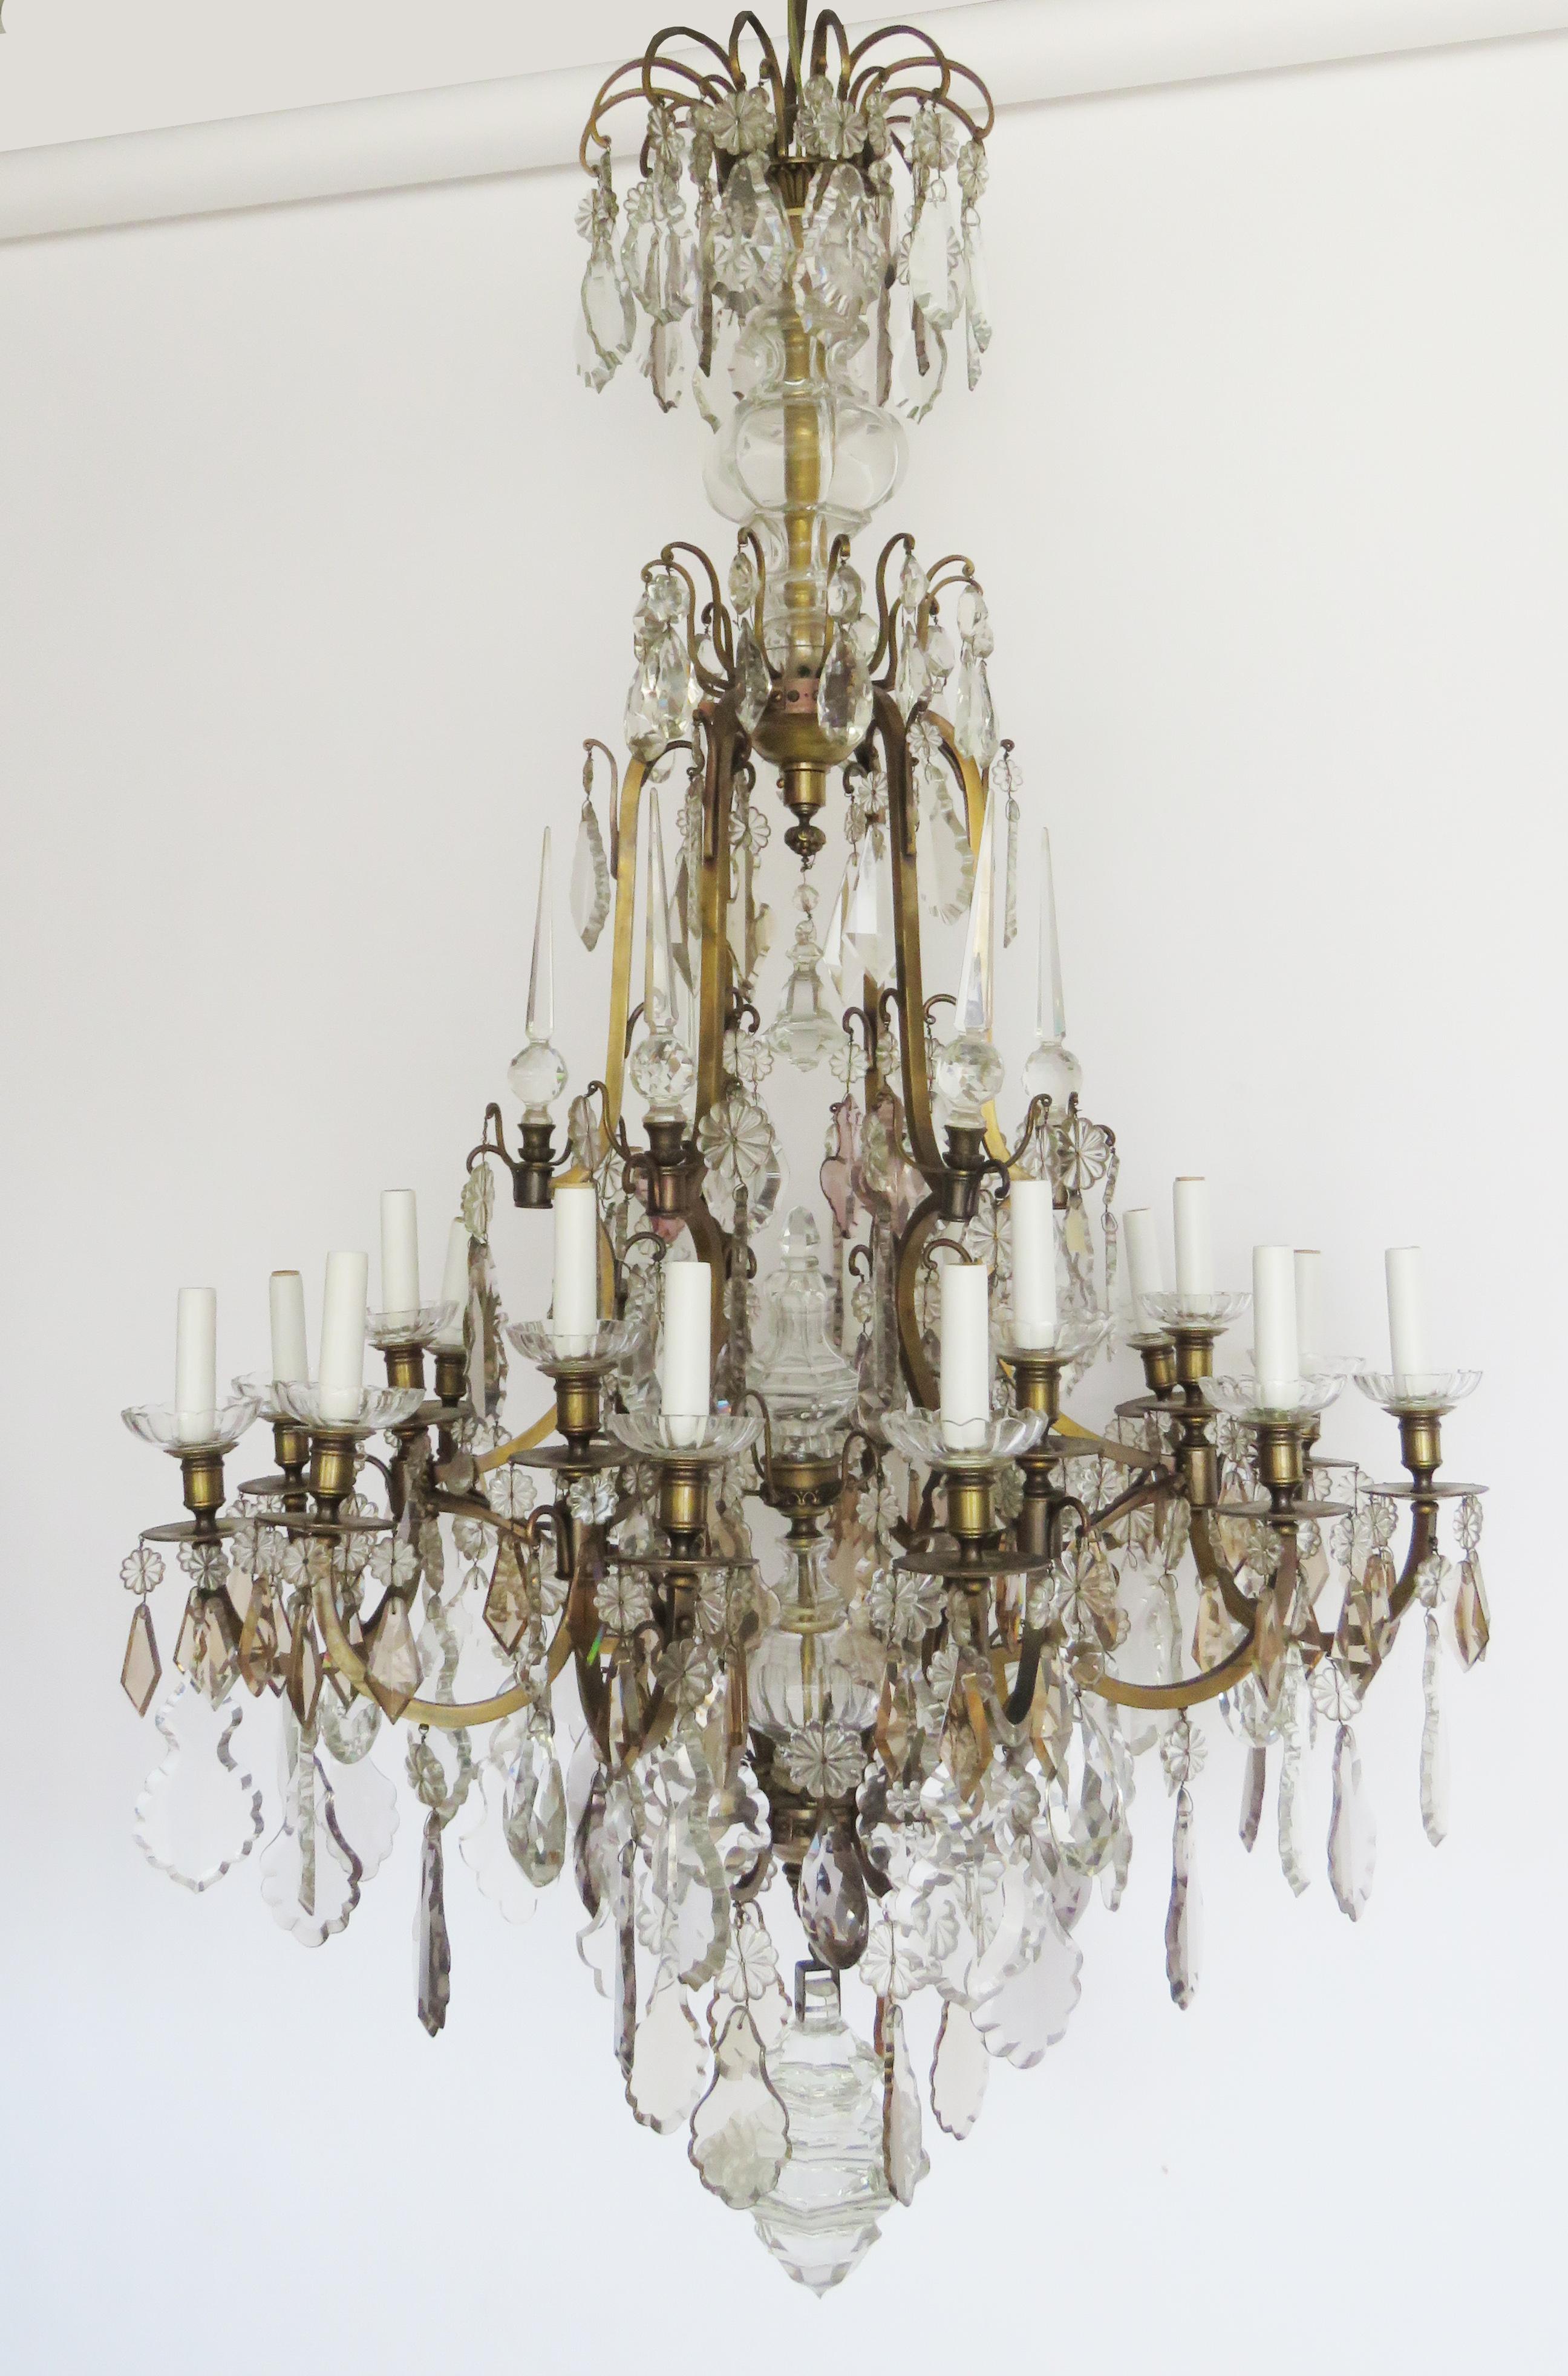 Impressive Versailles chandelier with crystal column, fine gilt arms and 21 candle arm lights with glass bobeches supporting colored crystal prisms and rosette pendants. UL wired.